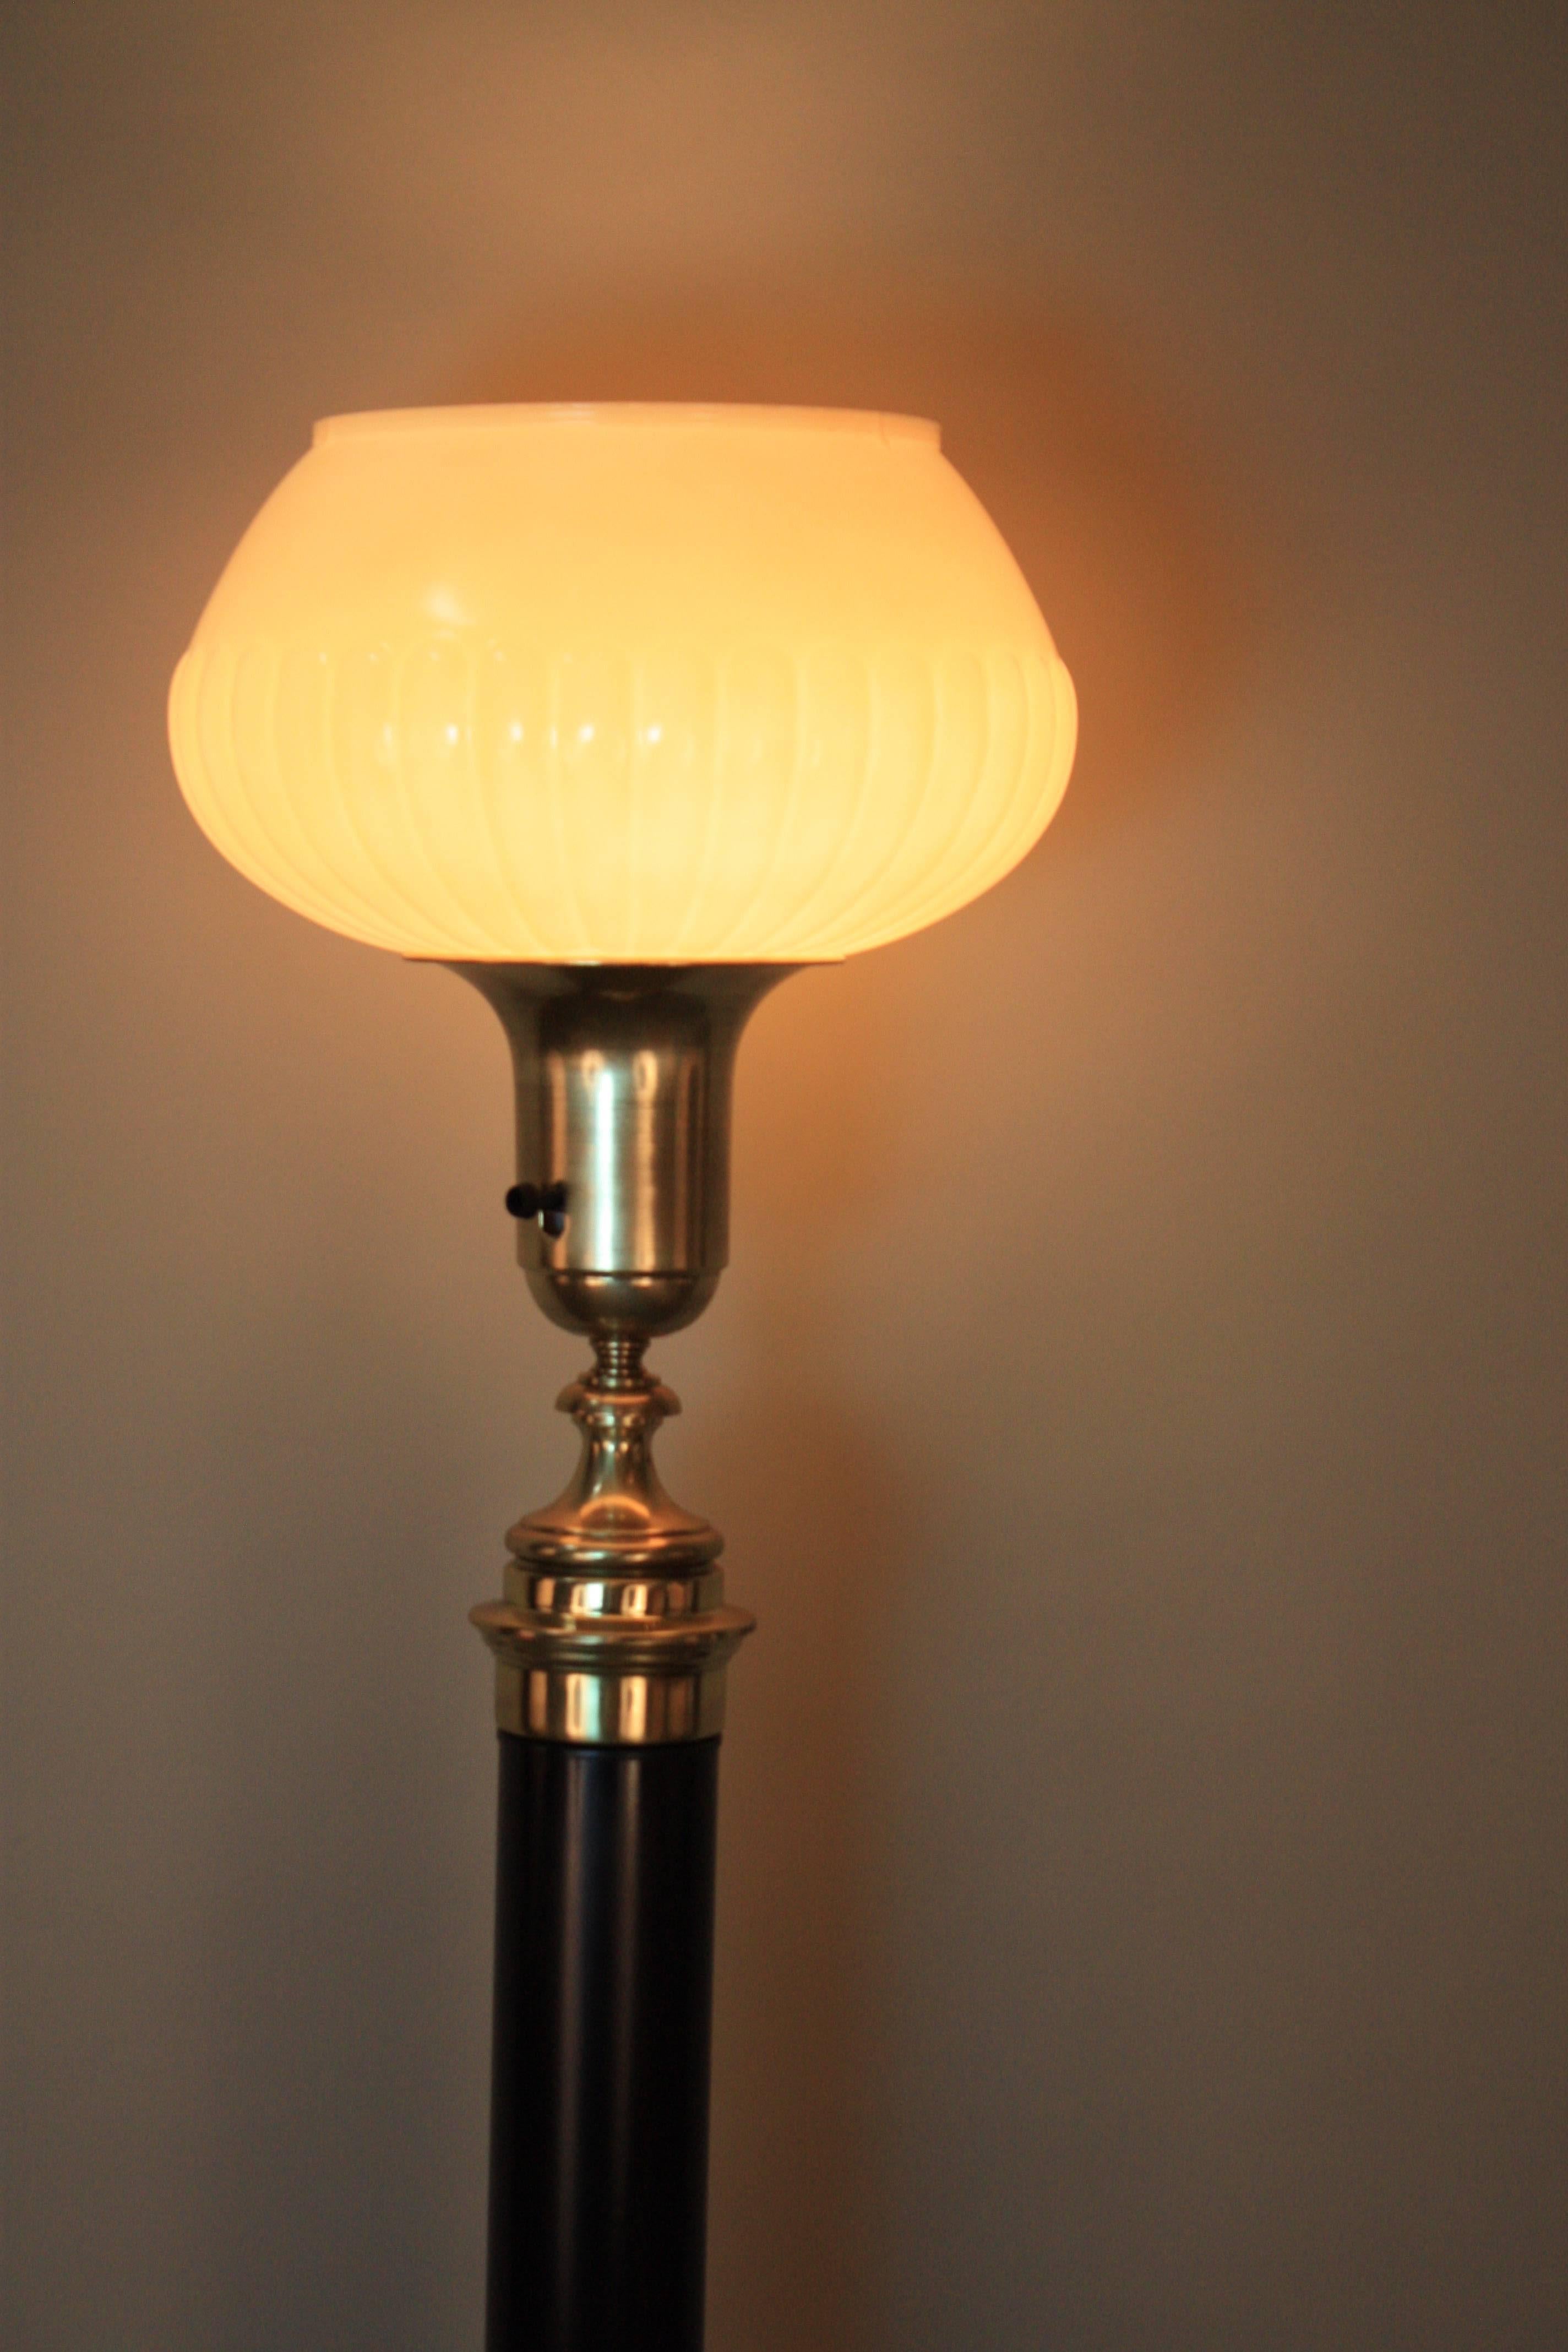 A Classic design American 1930s torchiere floor lamp in brass and black lacquer.
Three way socket 100-300watts.